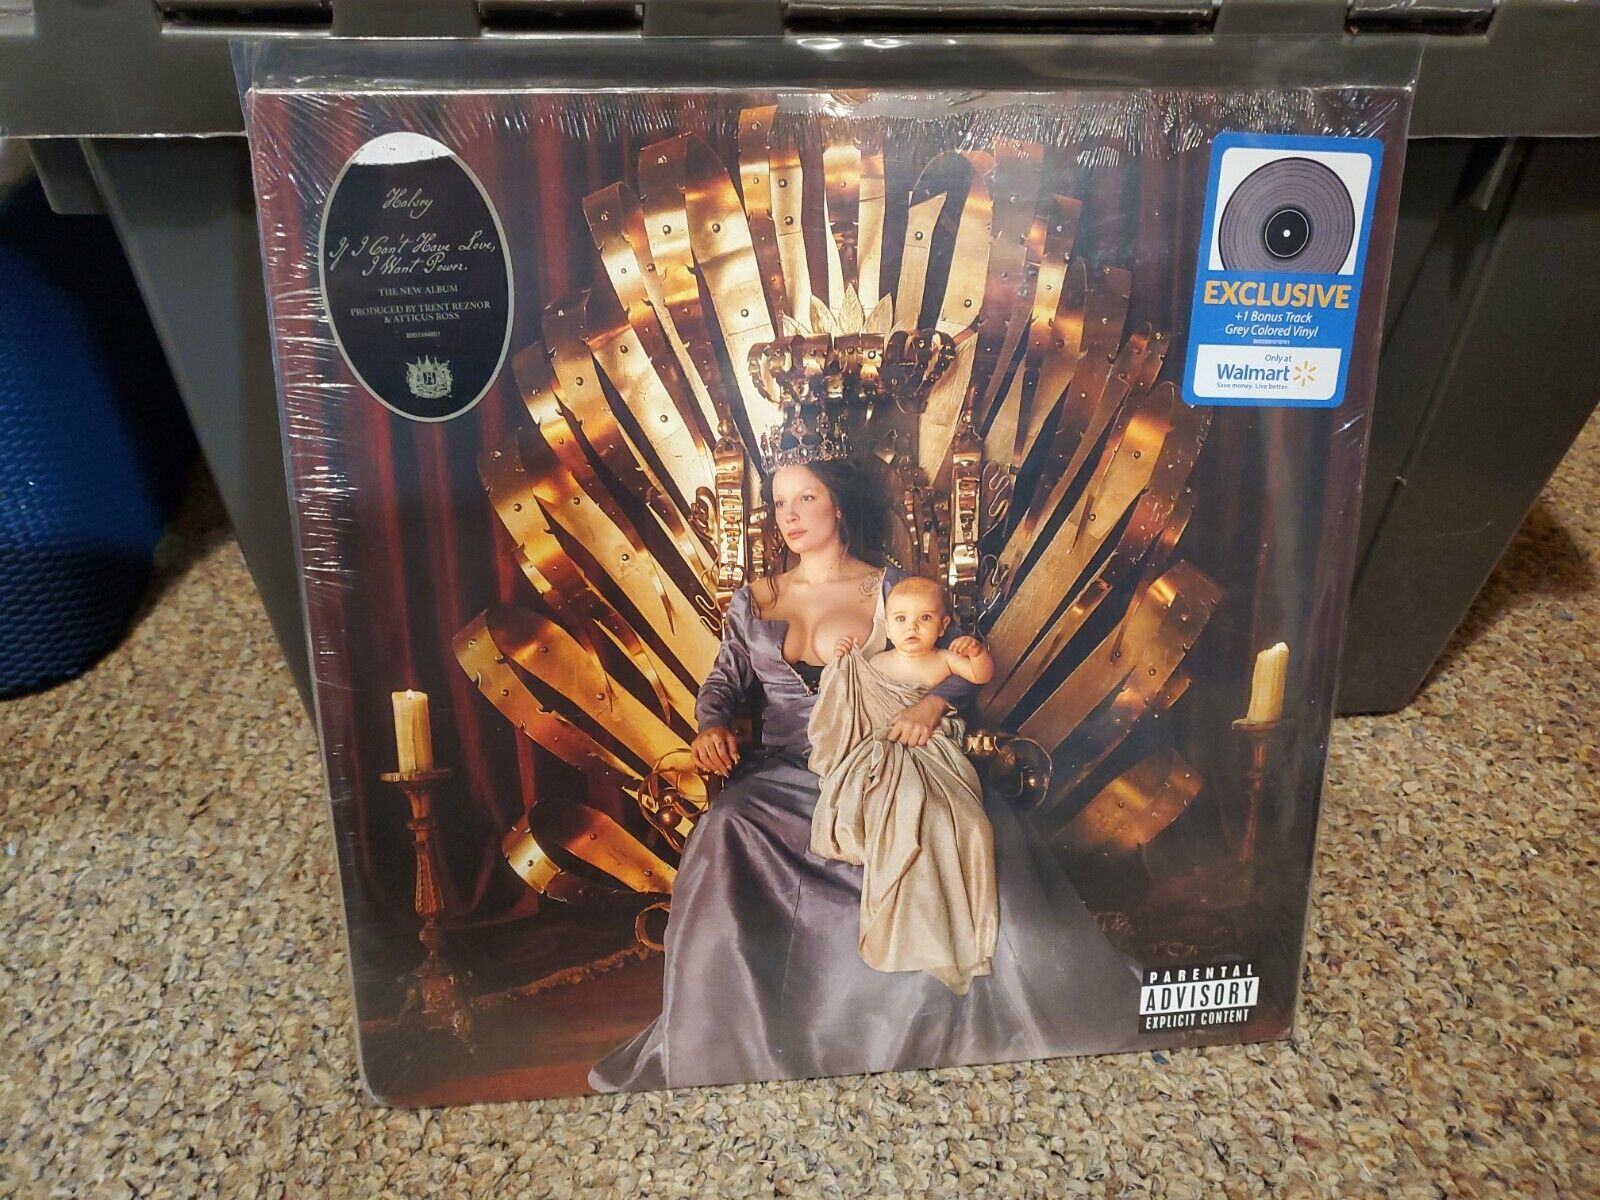 Halsey - If I Can’t Have Love, I Want Power (Gray Vinyl) Walmart Exclusive